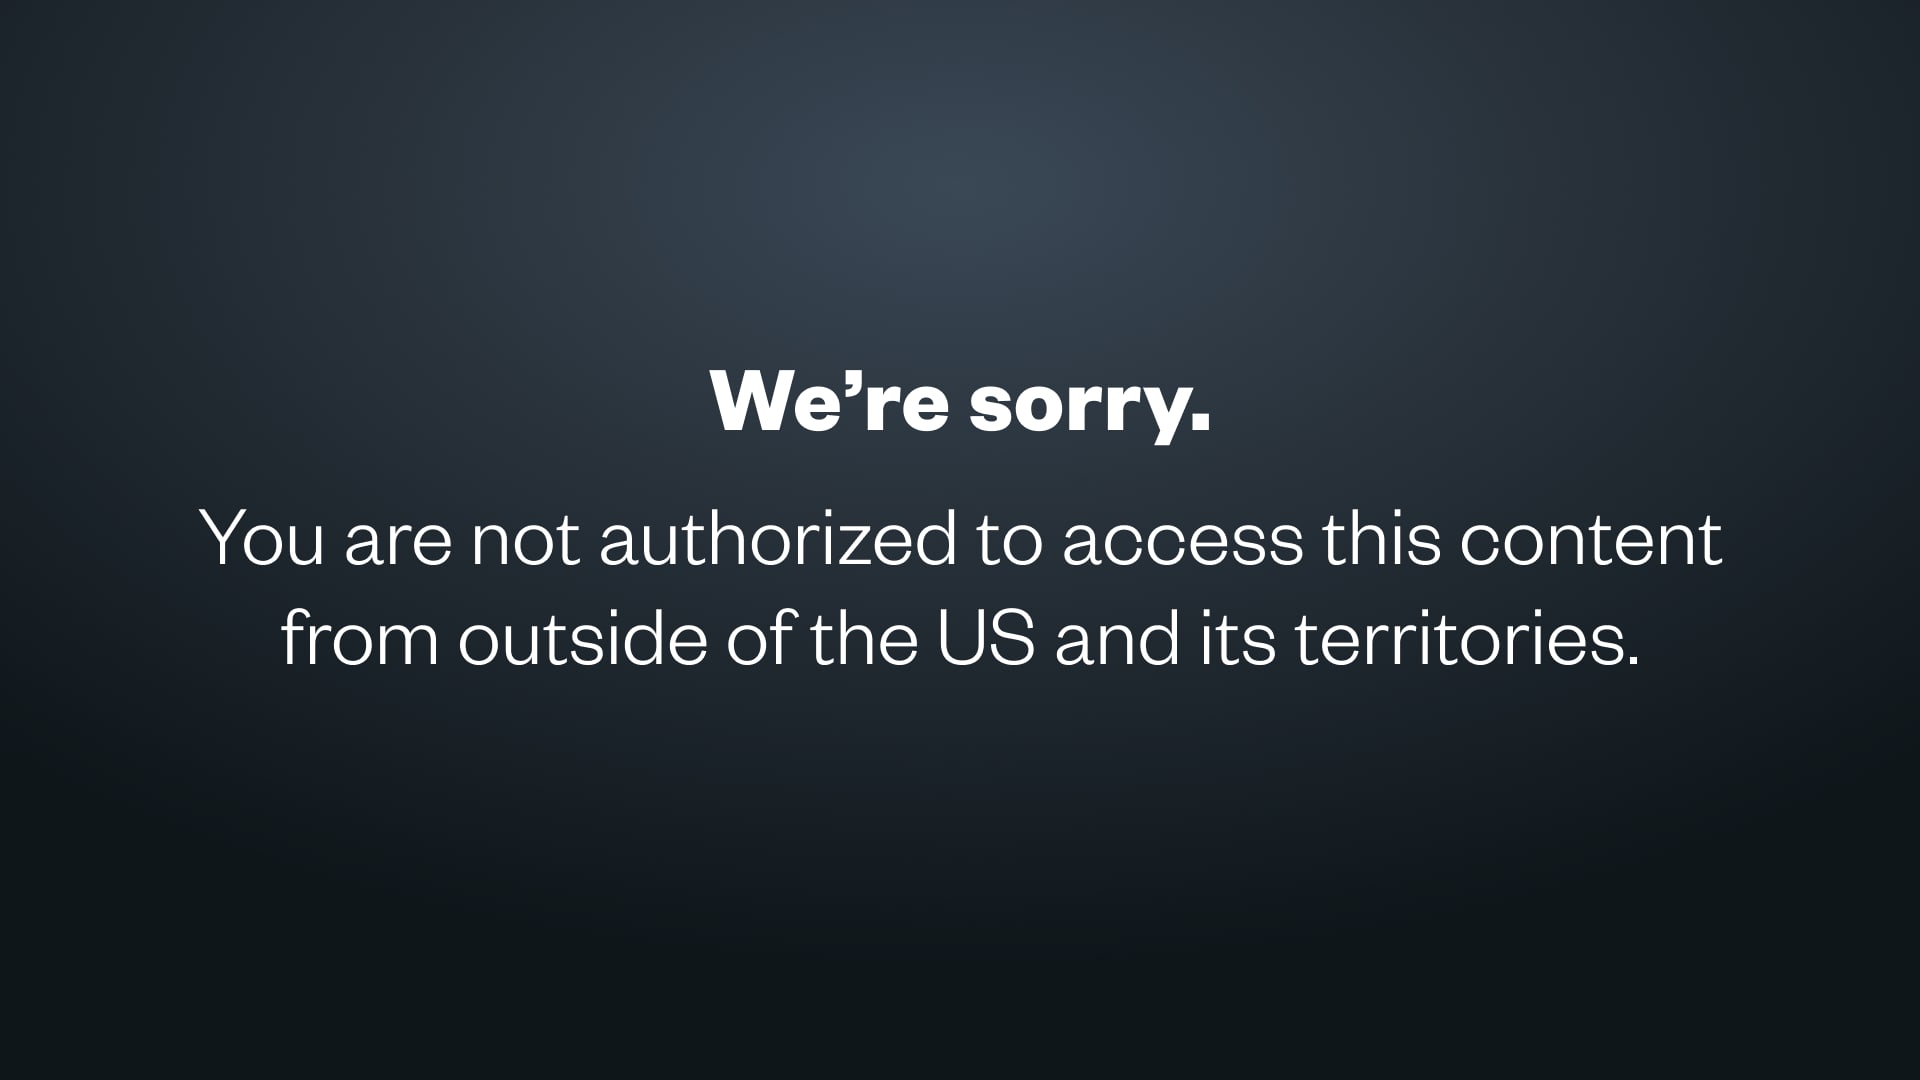 You are not authorized to access this content from outside of the US and its territories